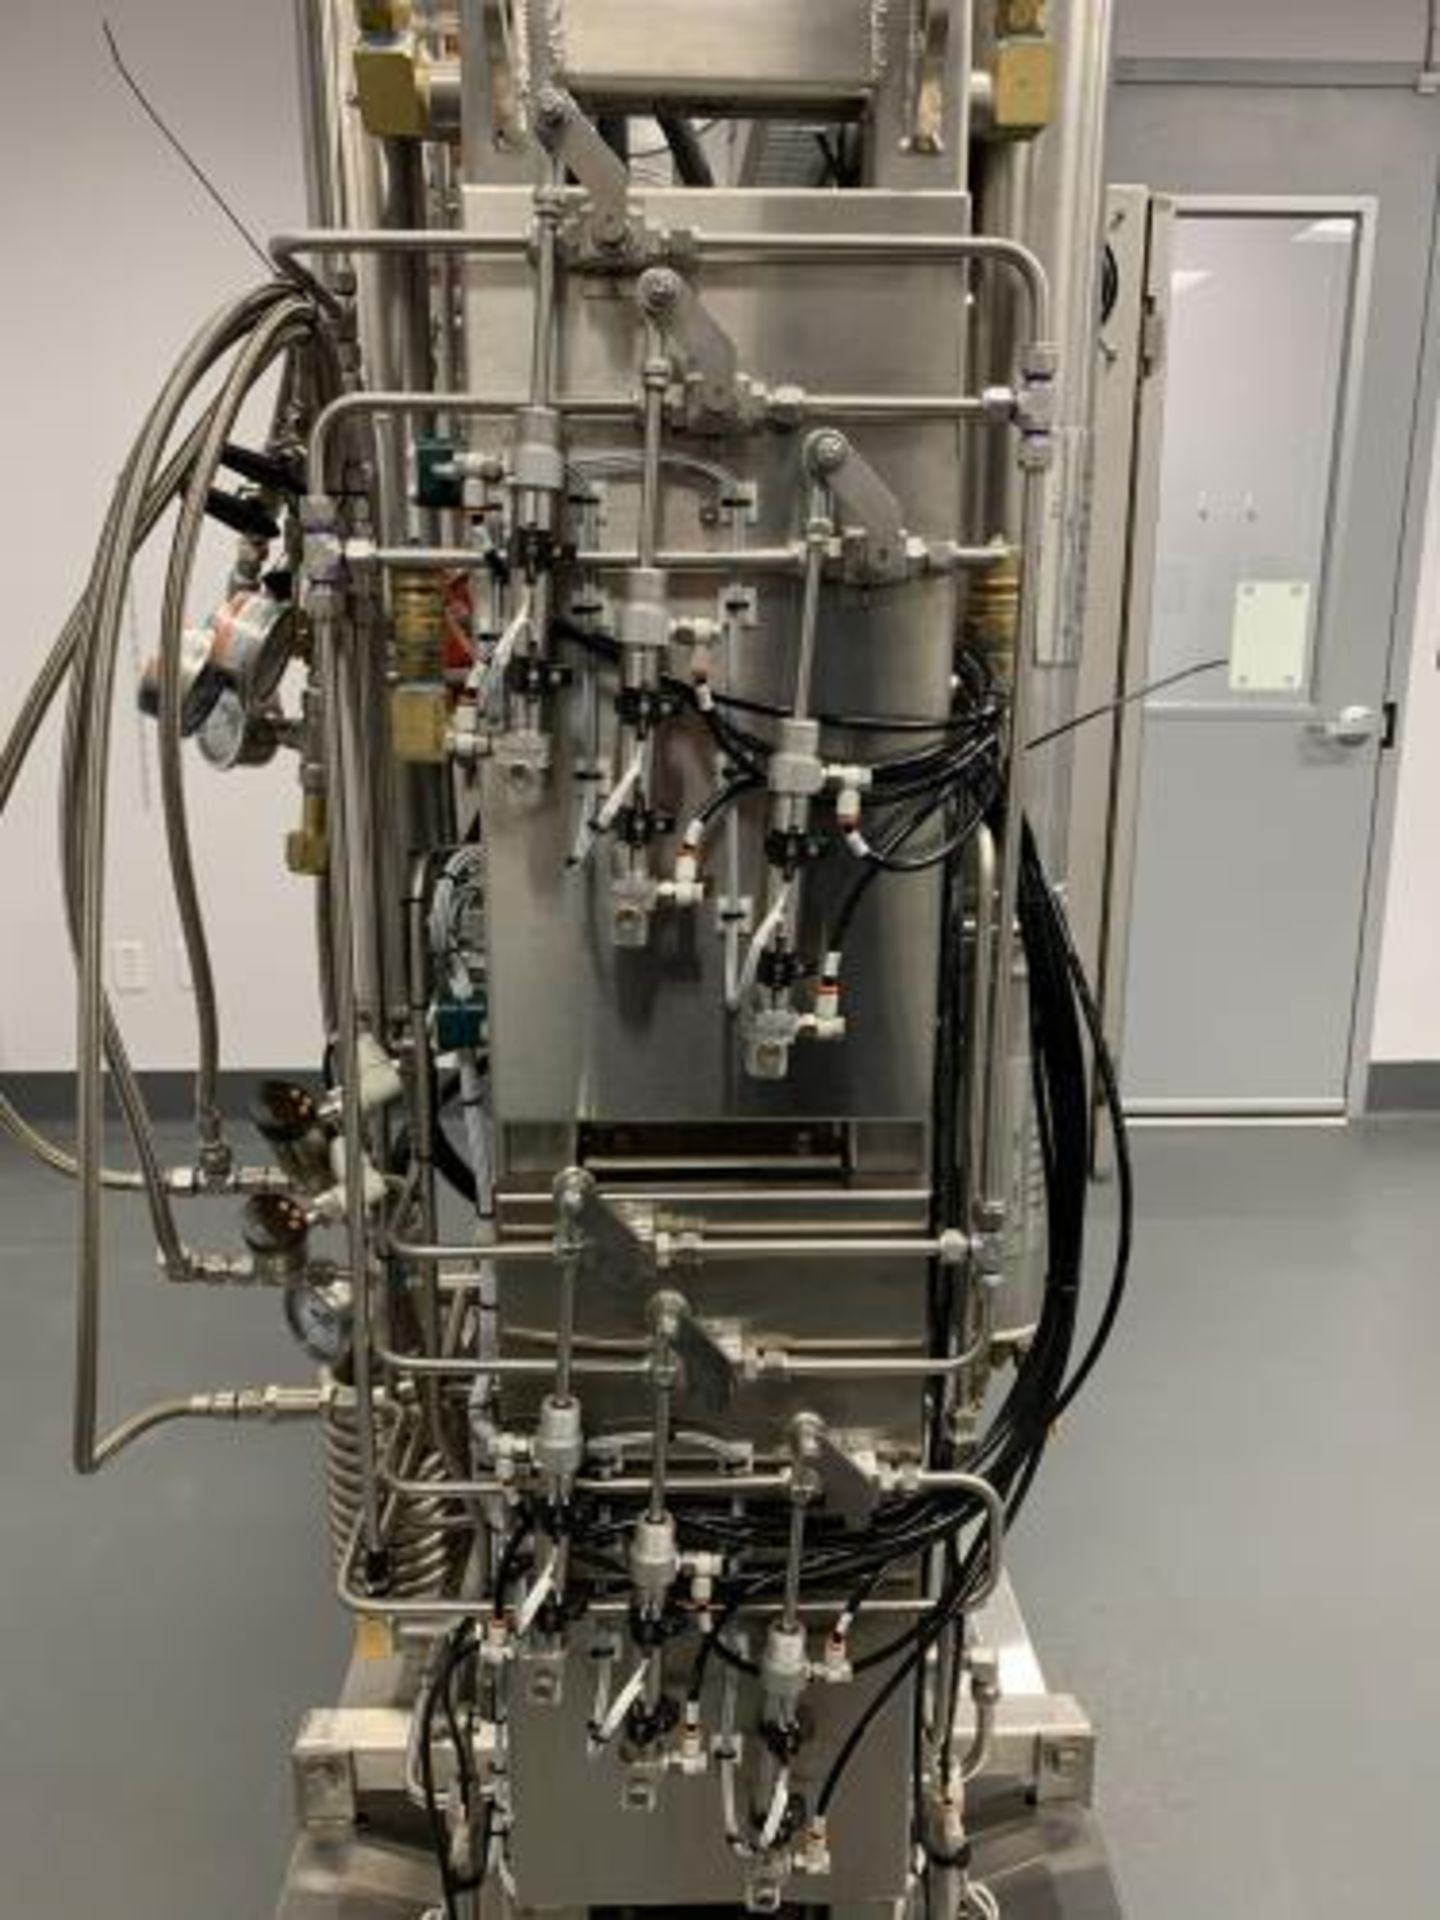 MRX 20 LE Supercritical CO2 Automated Extractor System - Image 5 of 28